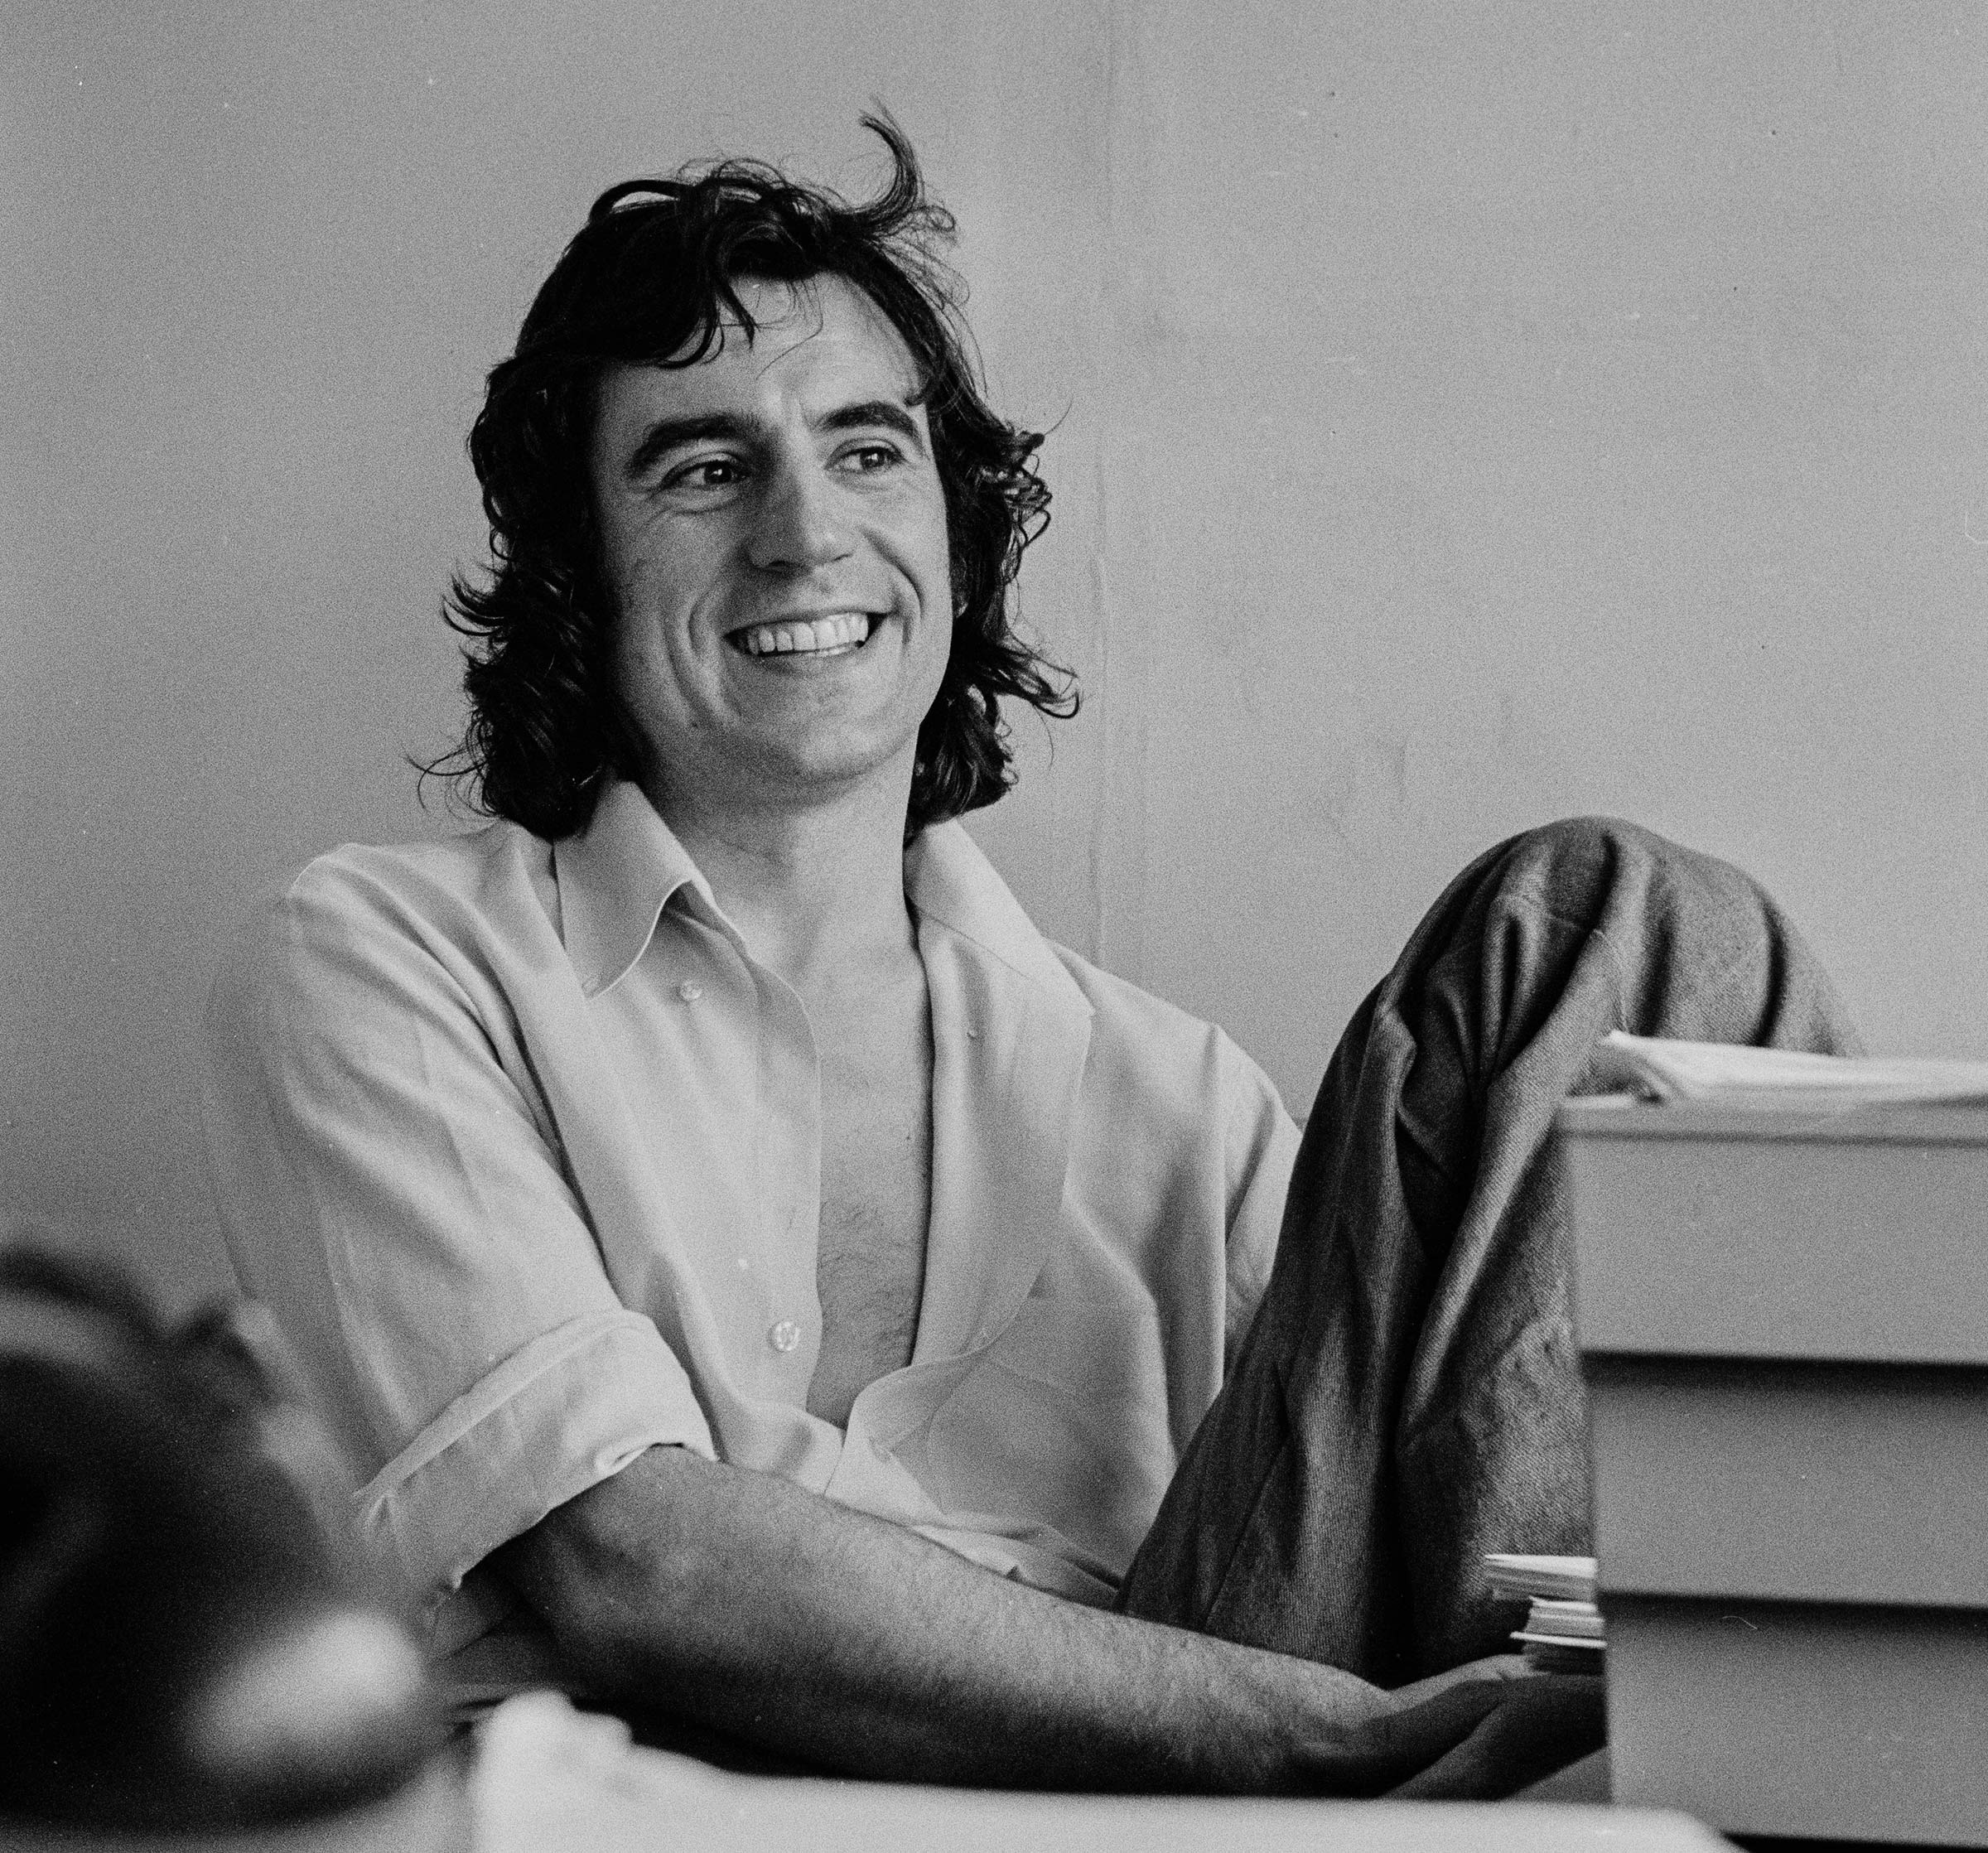 Jones at work in 1974, in a script conference for the BBC’s Monty Python’s Flying Circus